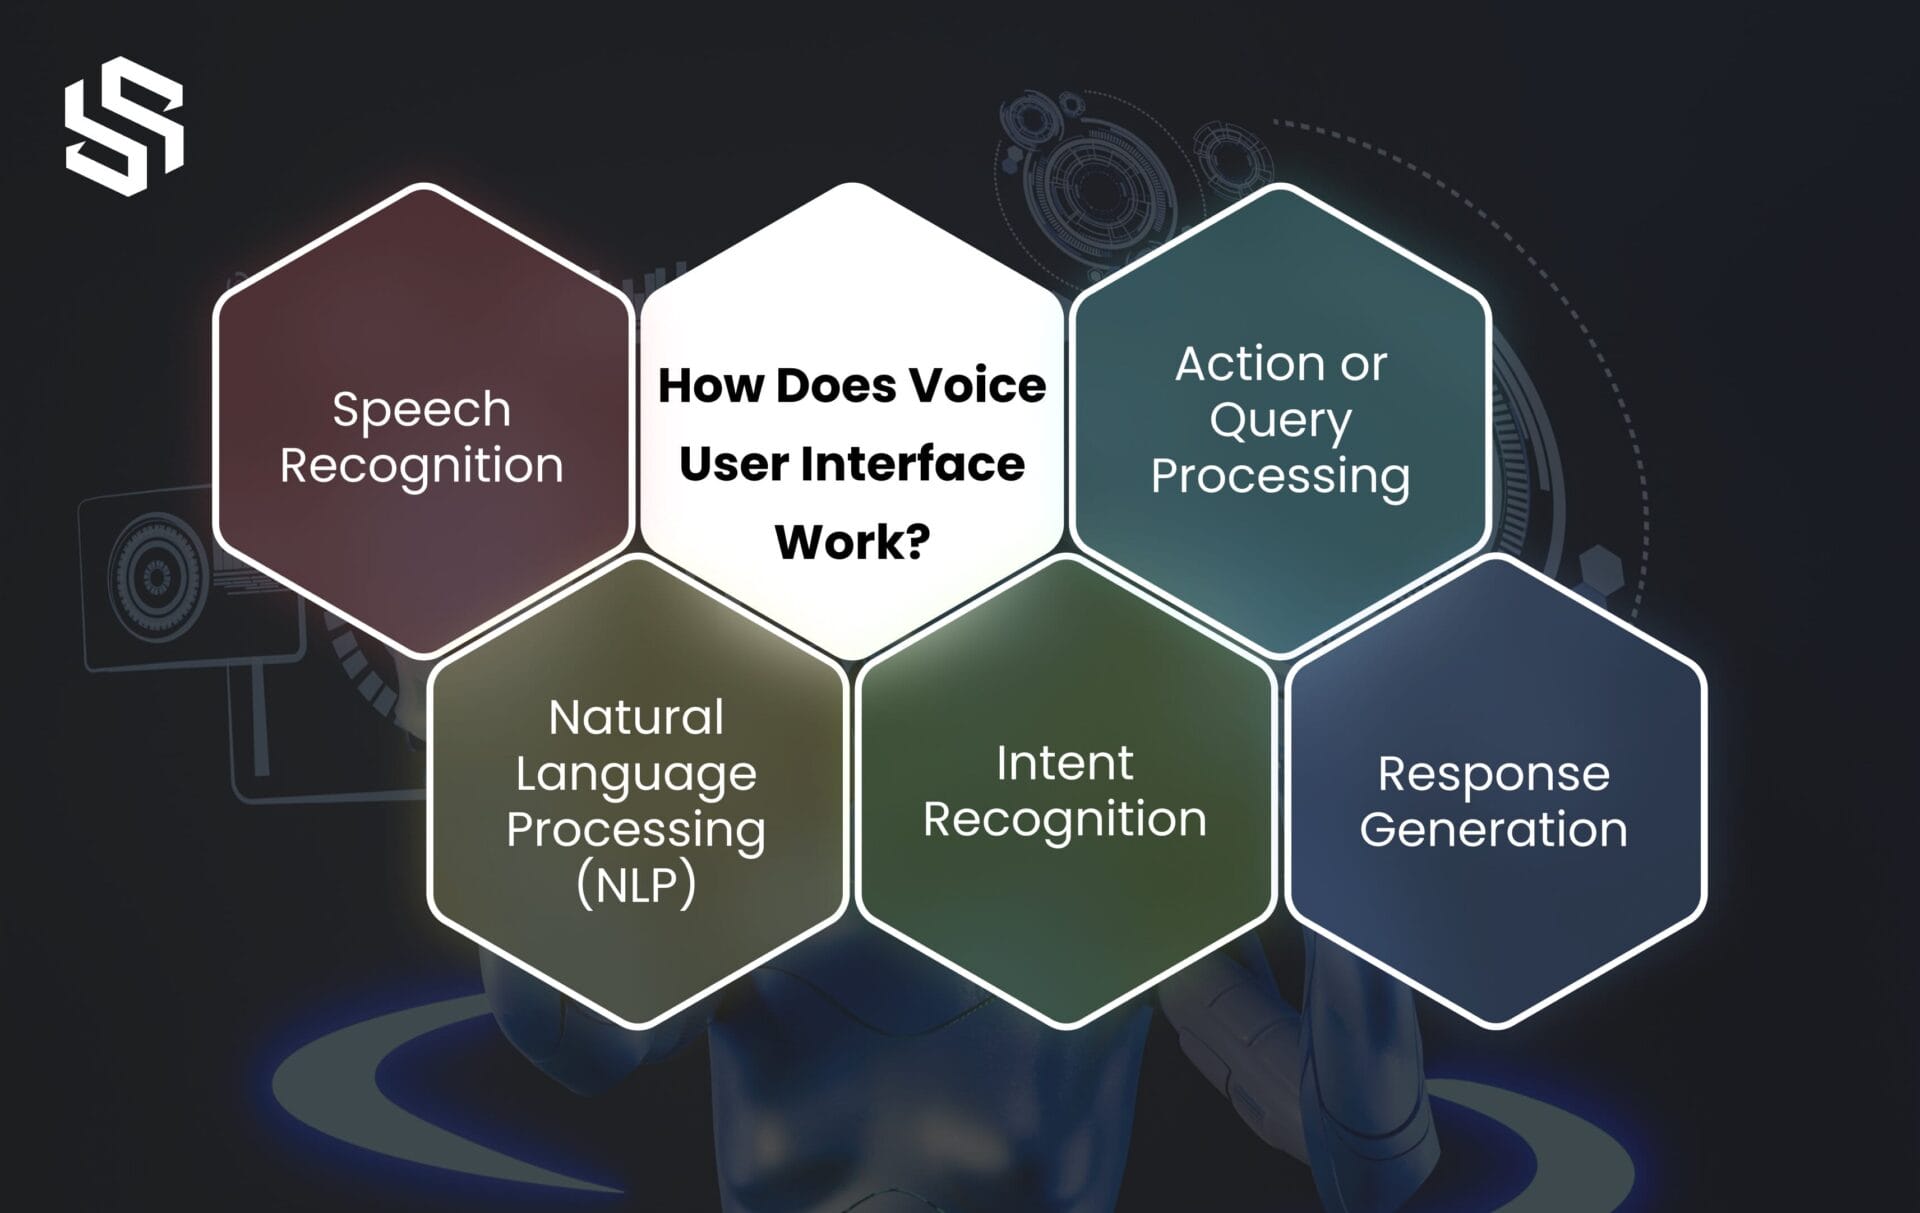 How Does Voice User Interface Work